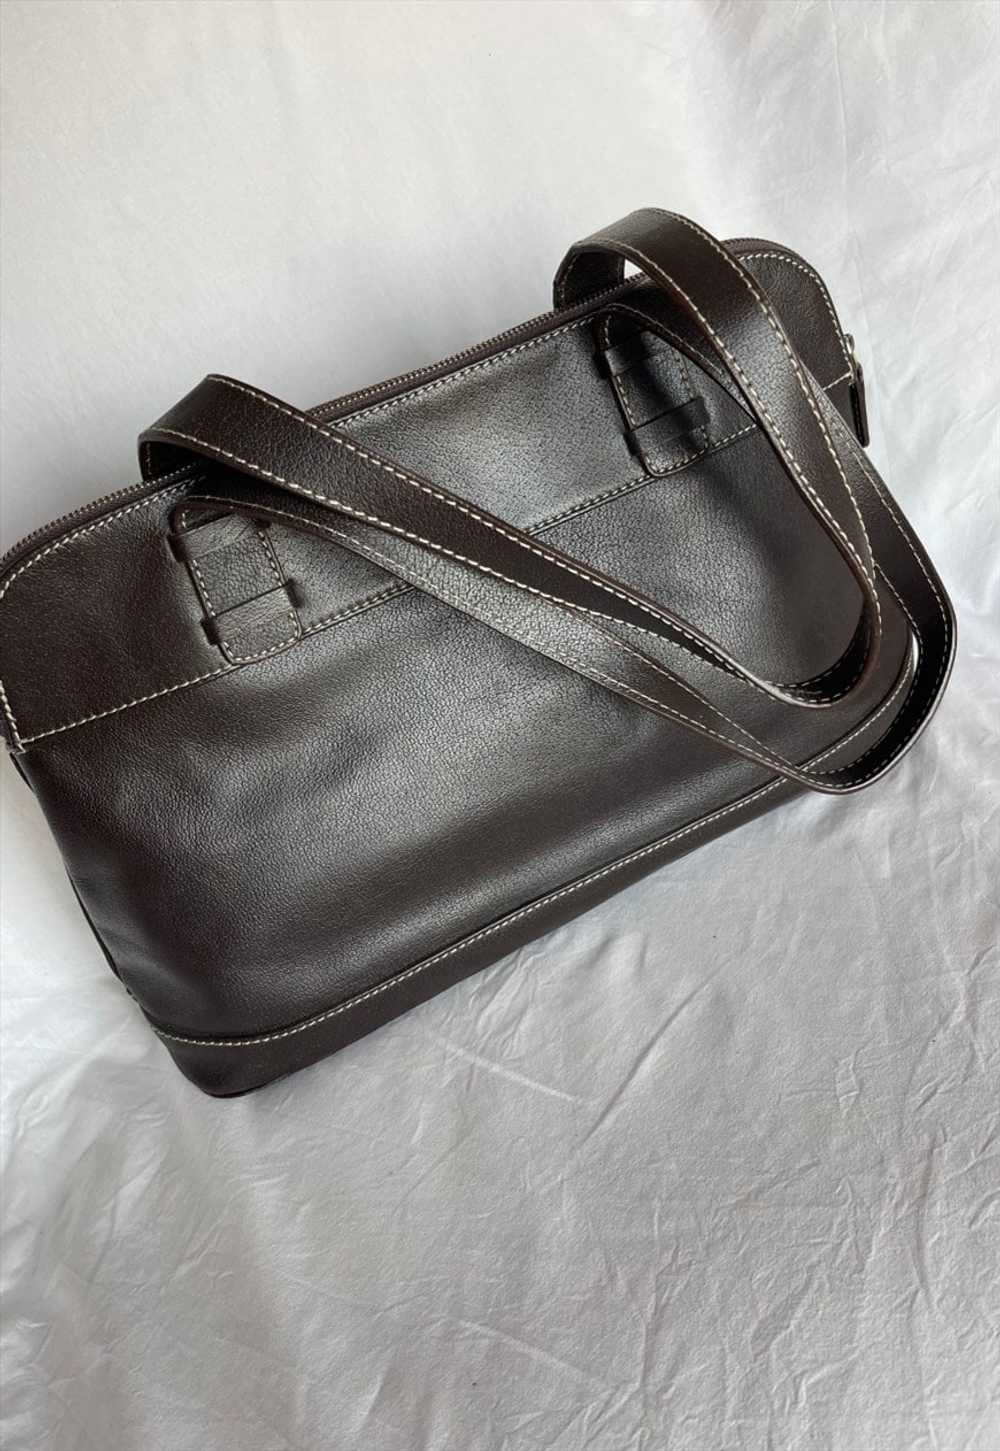 Vintage Tanner Tailor Chocolate Leather Bag - image 2